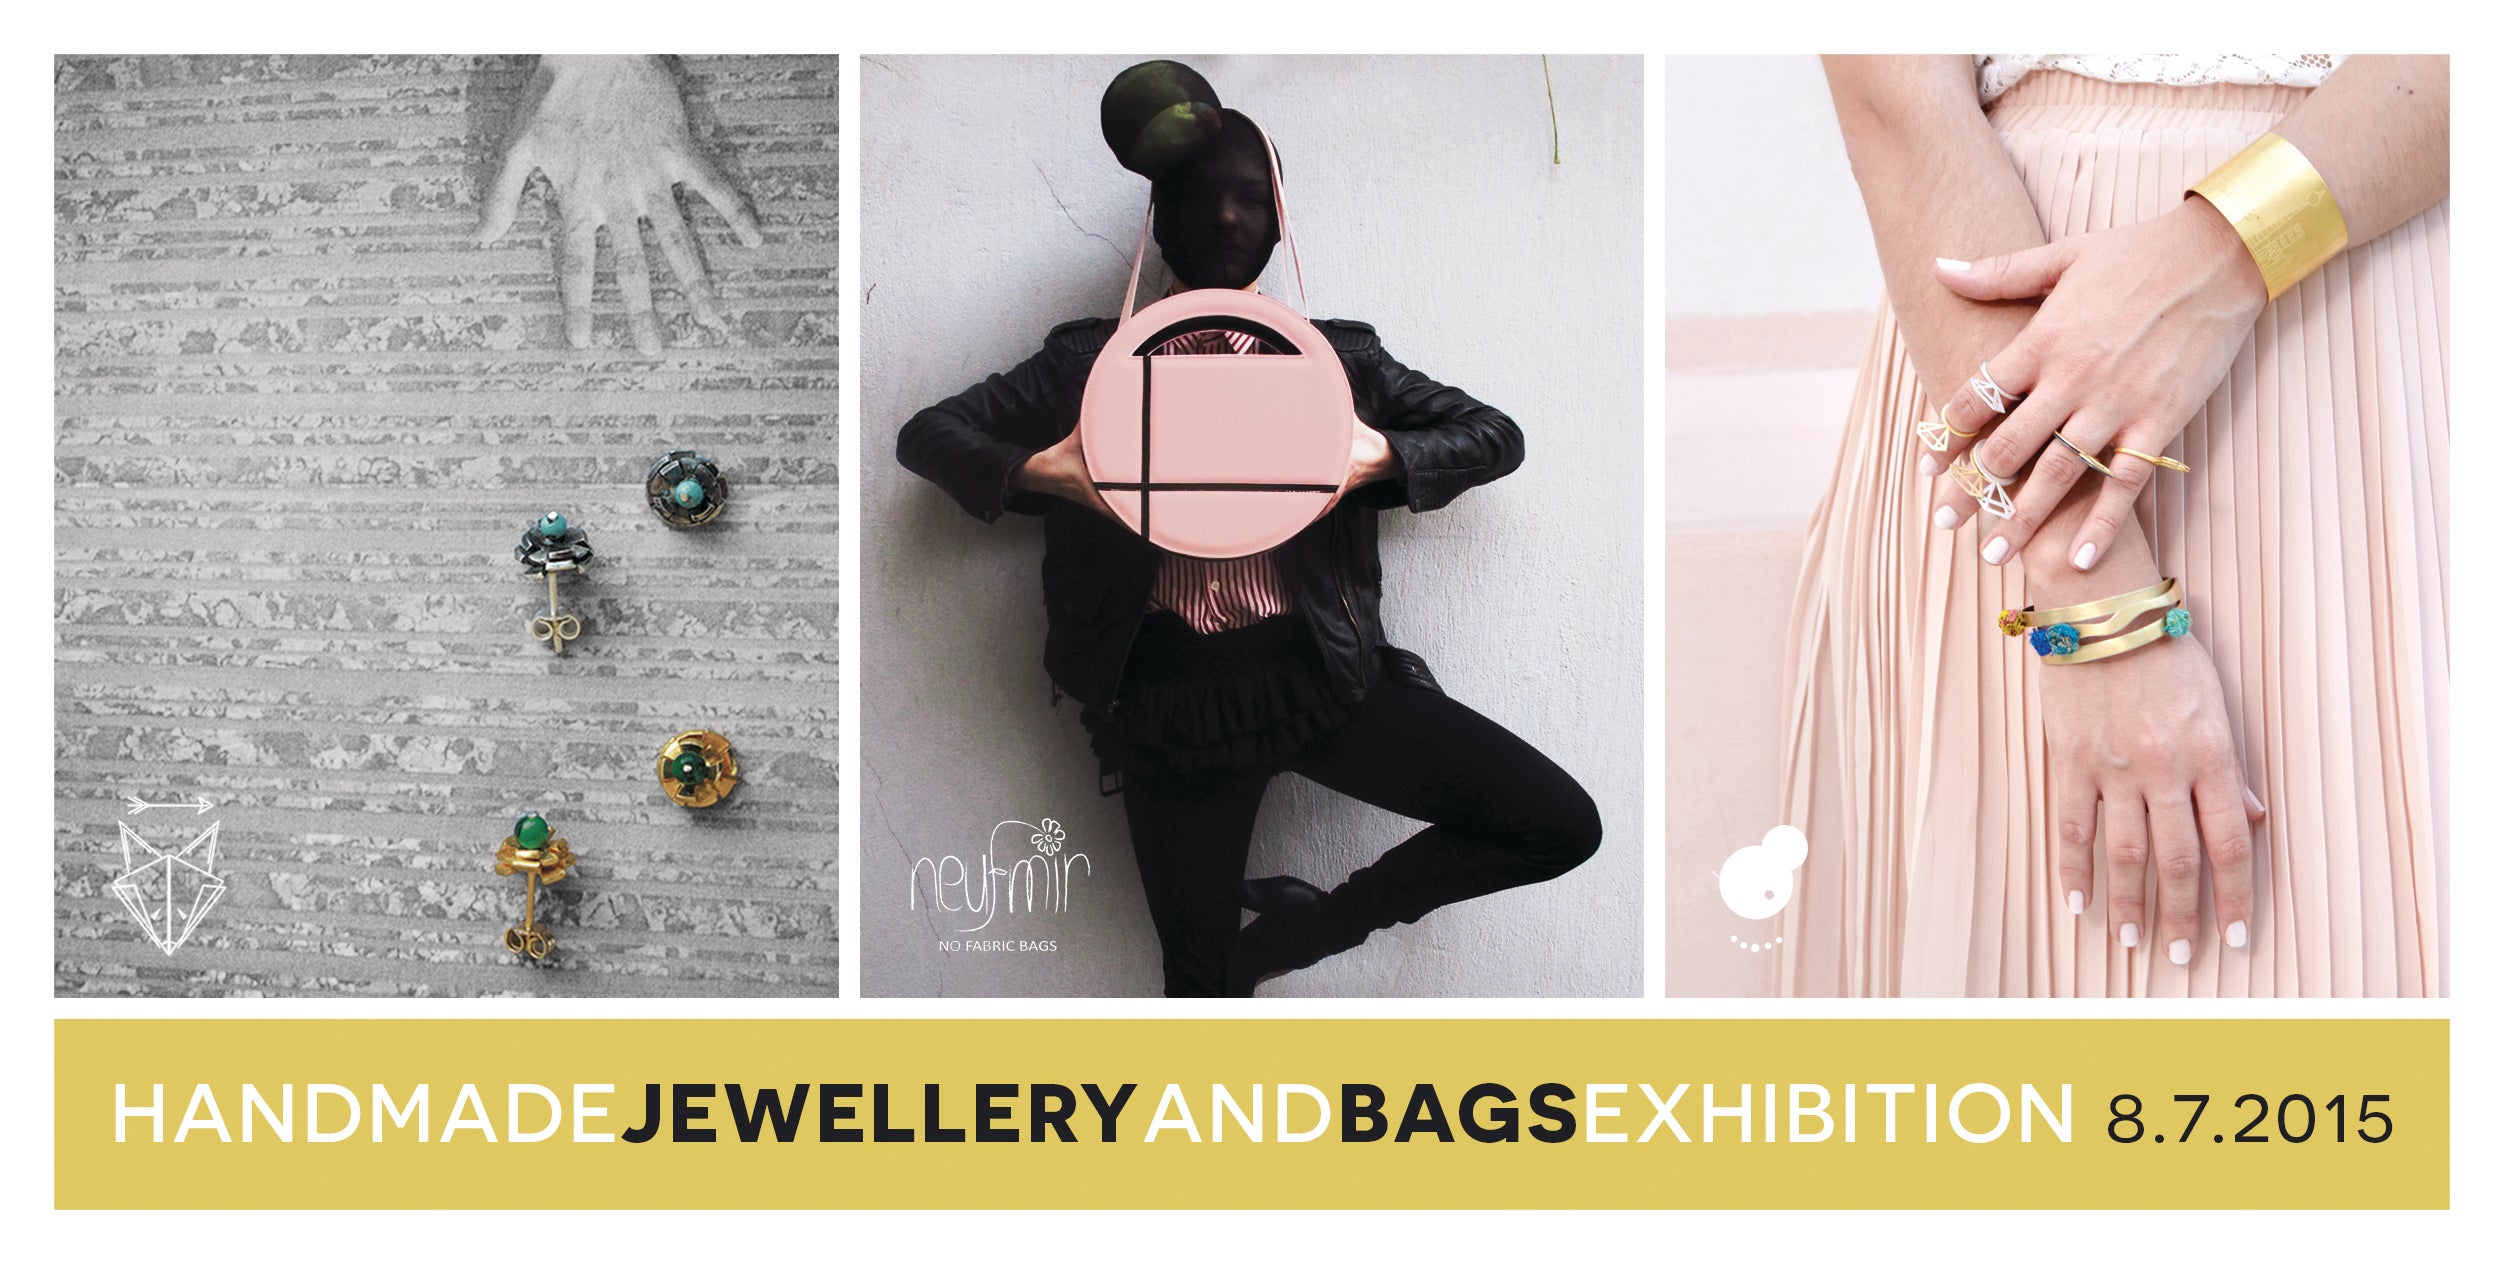 Handmade Jewellery & Bags Exhibition at Atelier Kunst - Moment